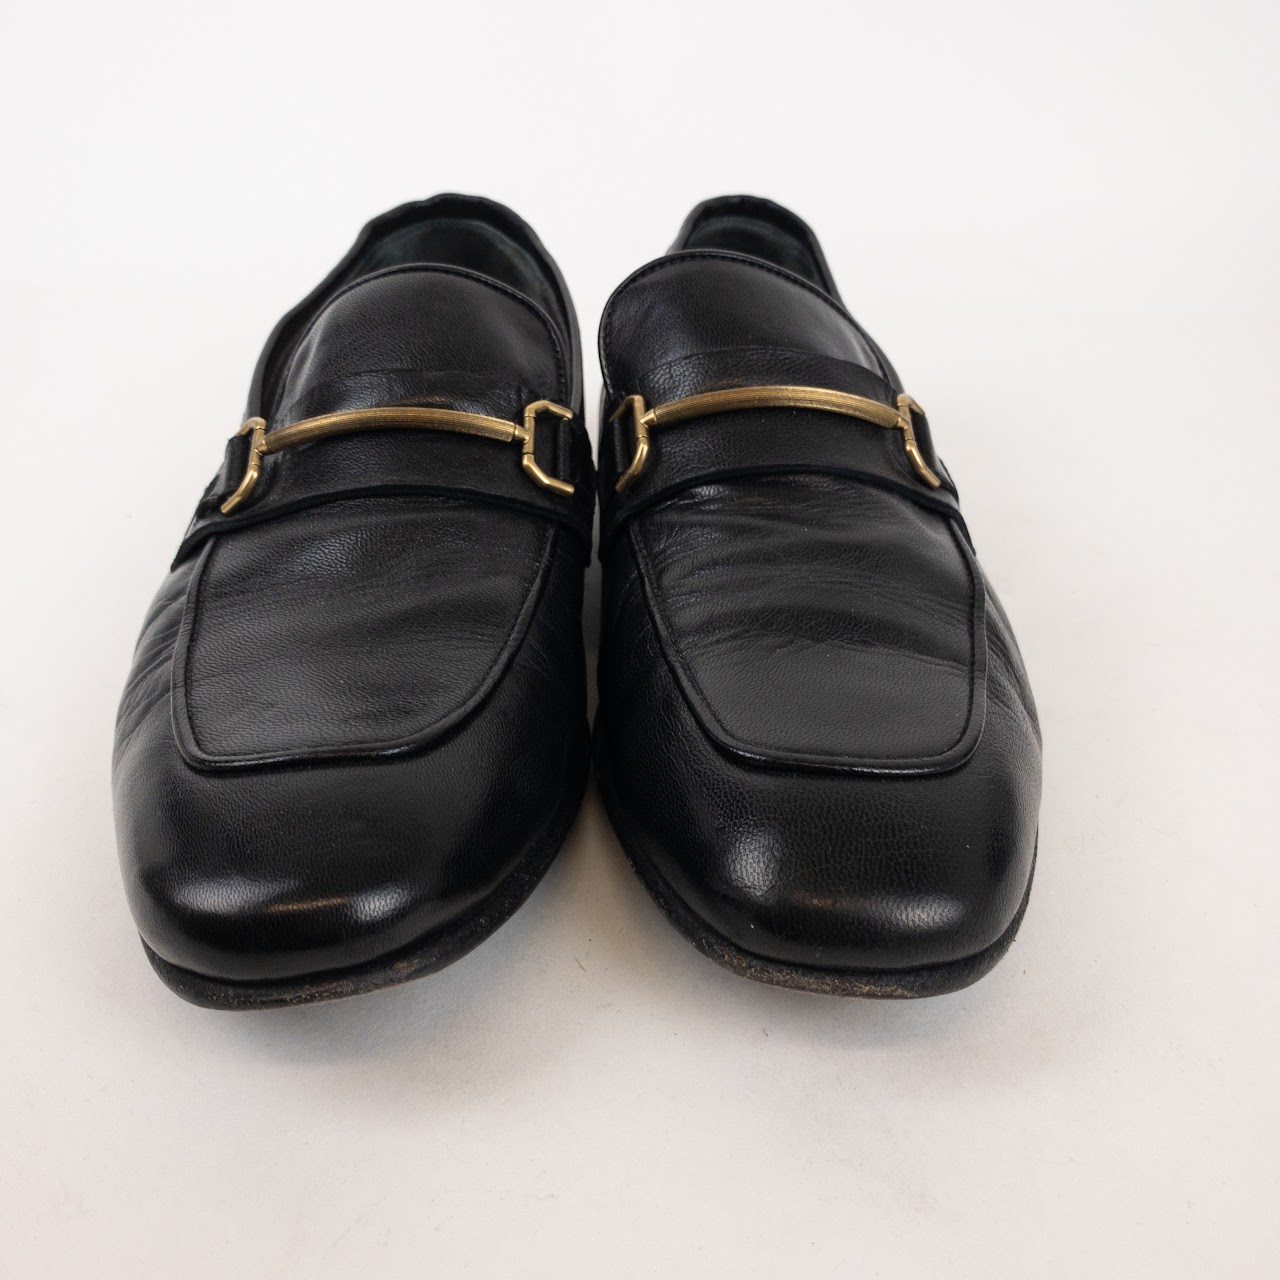 Dunhill Black Leather Horsebit Loafers